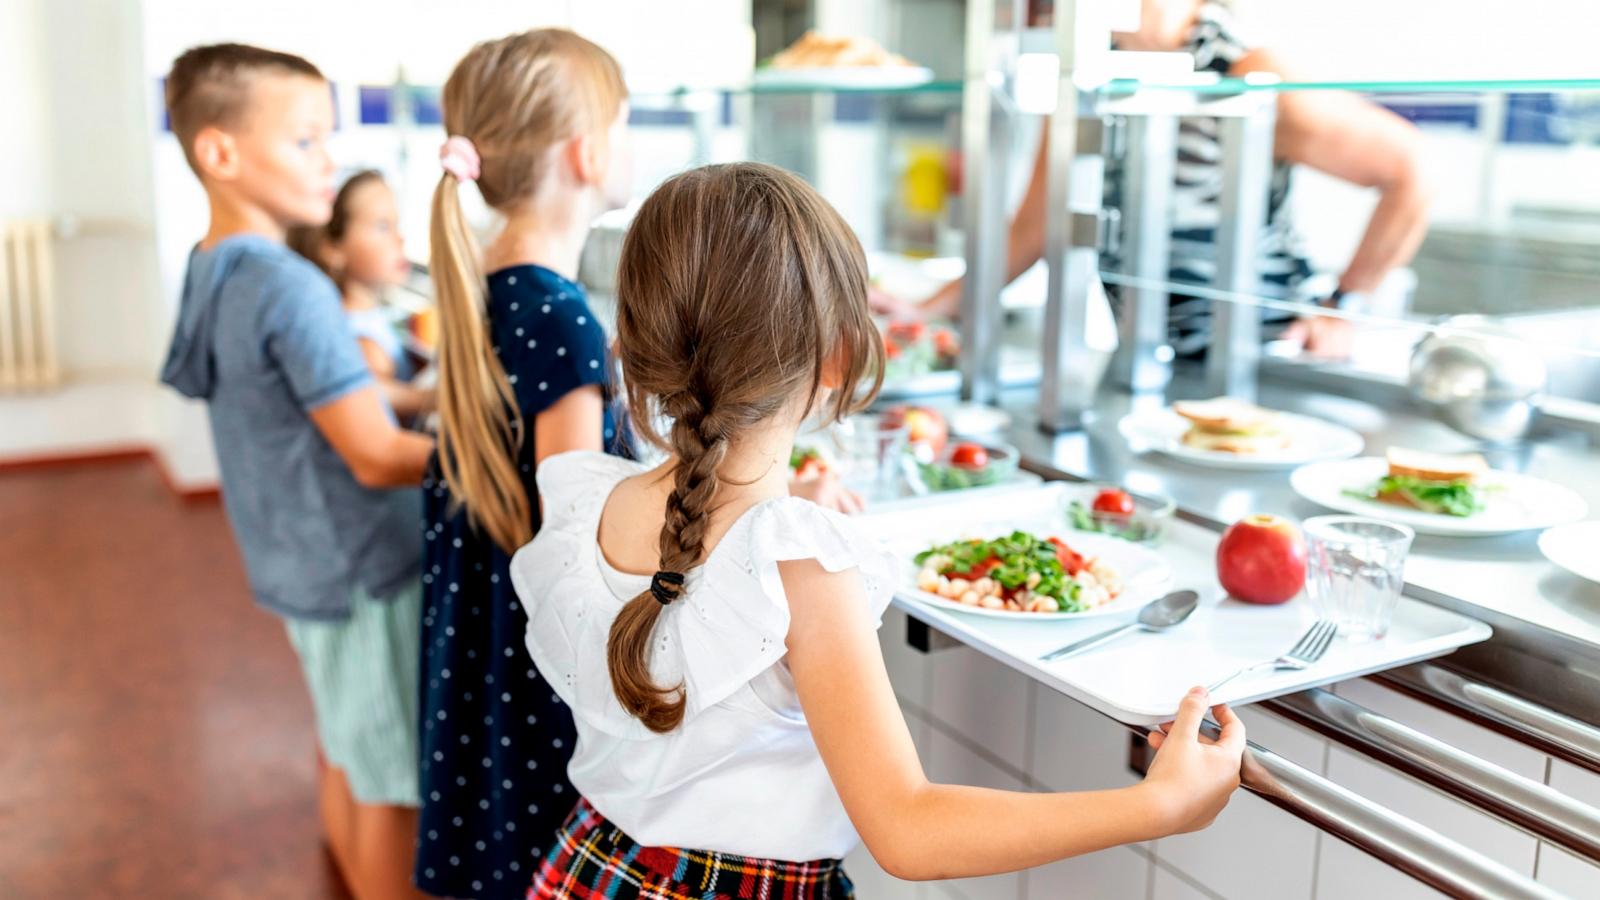 PHOTO: Stock photo of students waiting in a lunch line.